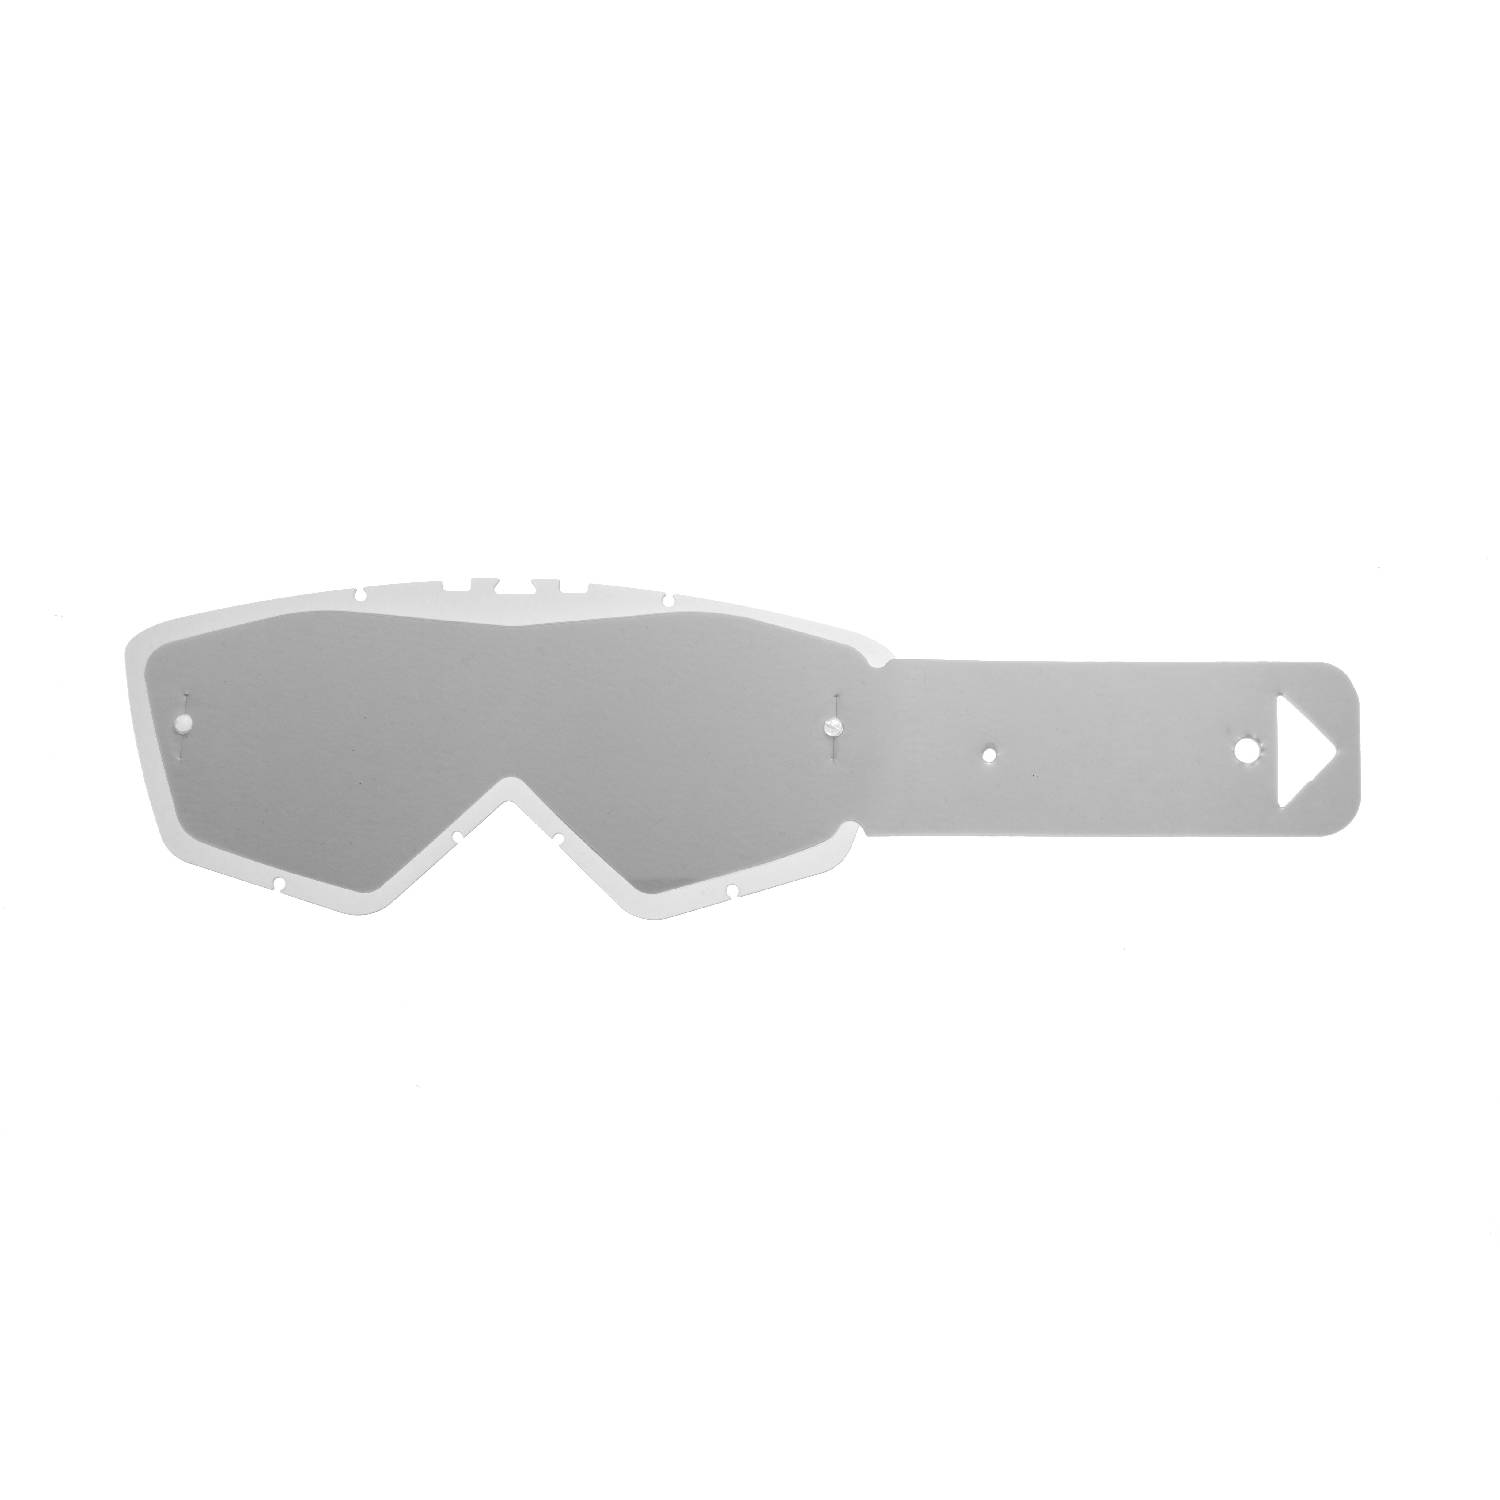 combo lenses with clear lenses with 10 tear off compatible for Ariete Andrenaline RC07 / Ride And Roll goggle